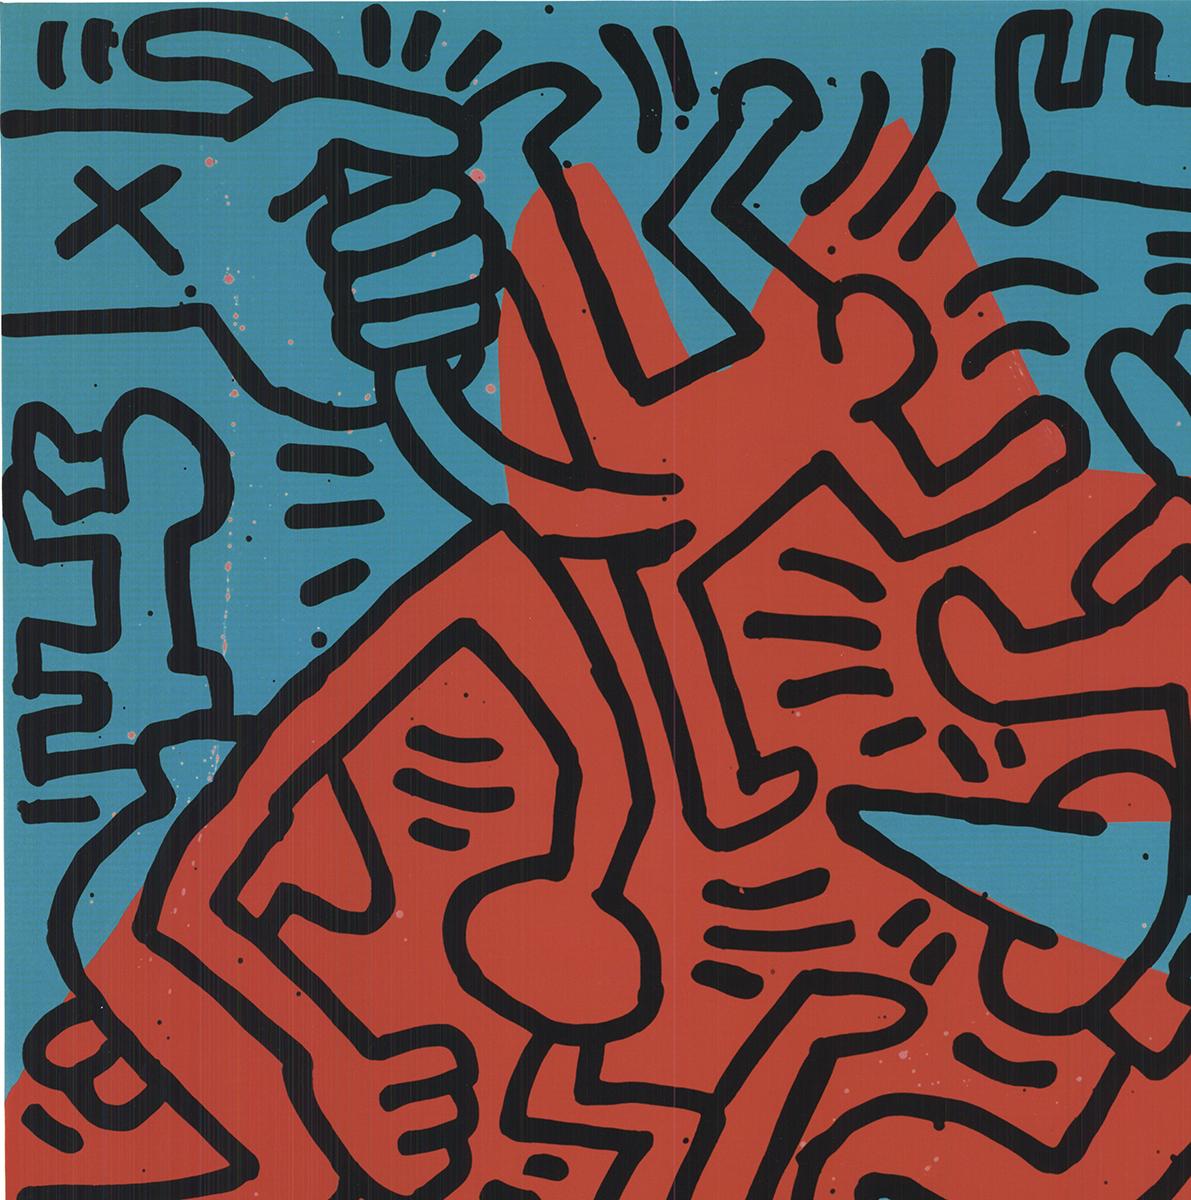 Offsetlithographie „Ohne Titel, 1984“, Keith Haring 2009- Offsetlithographie im Angebot 2